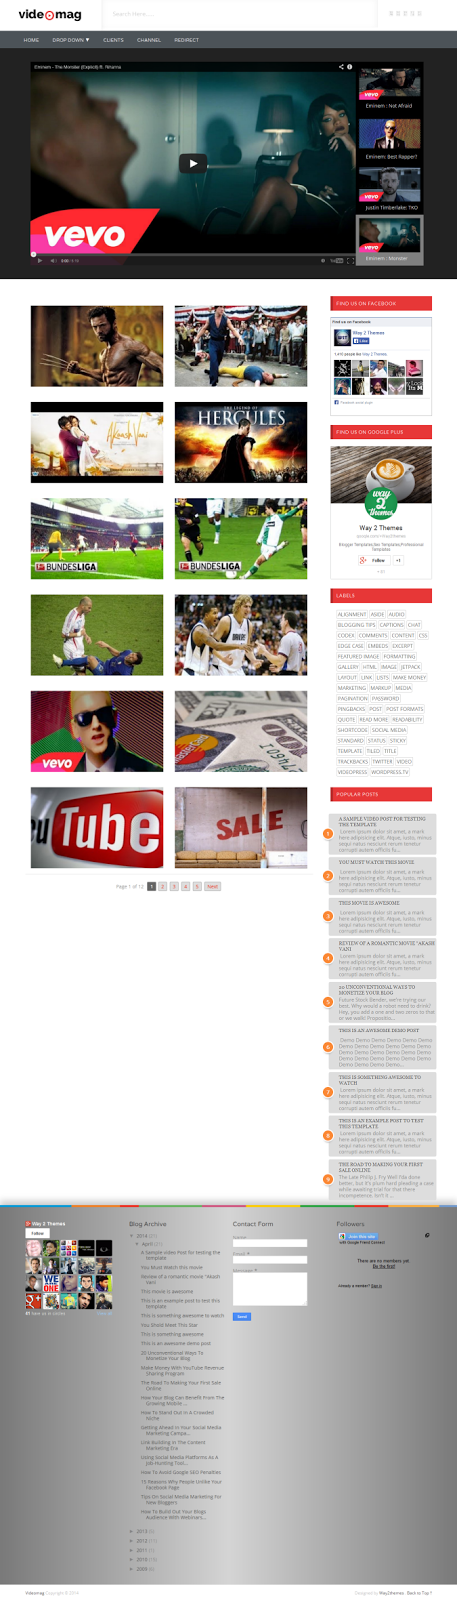 videomag-professional-video-blogger-template-nulled-clone-script